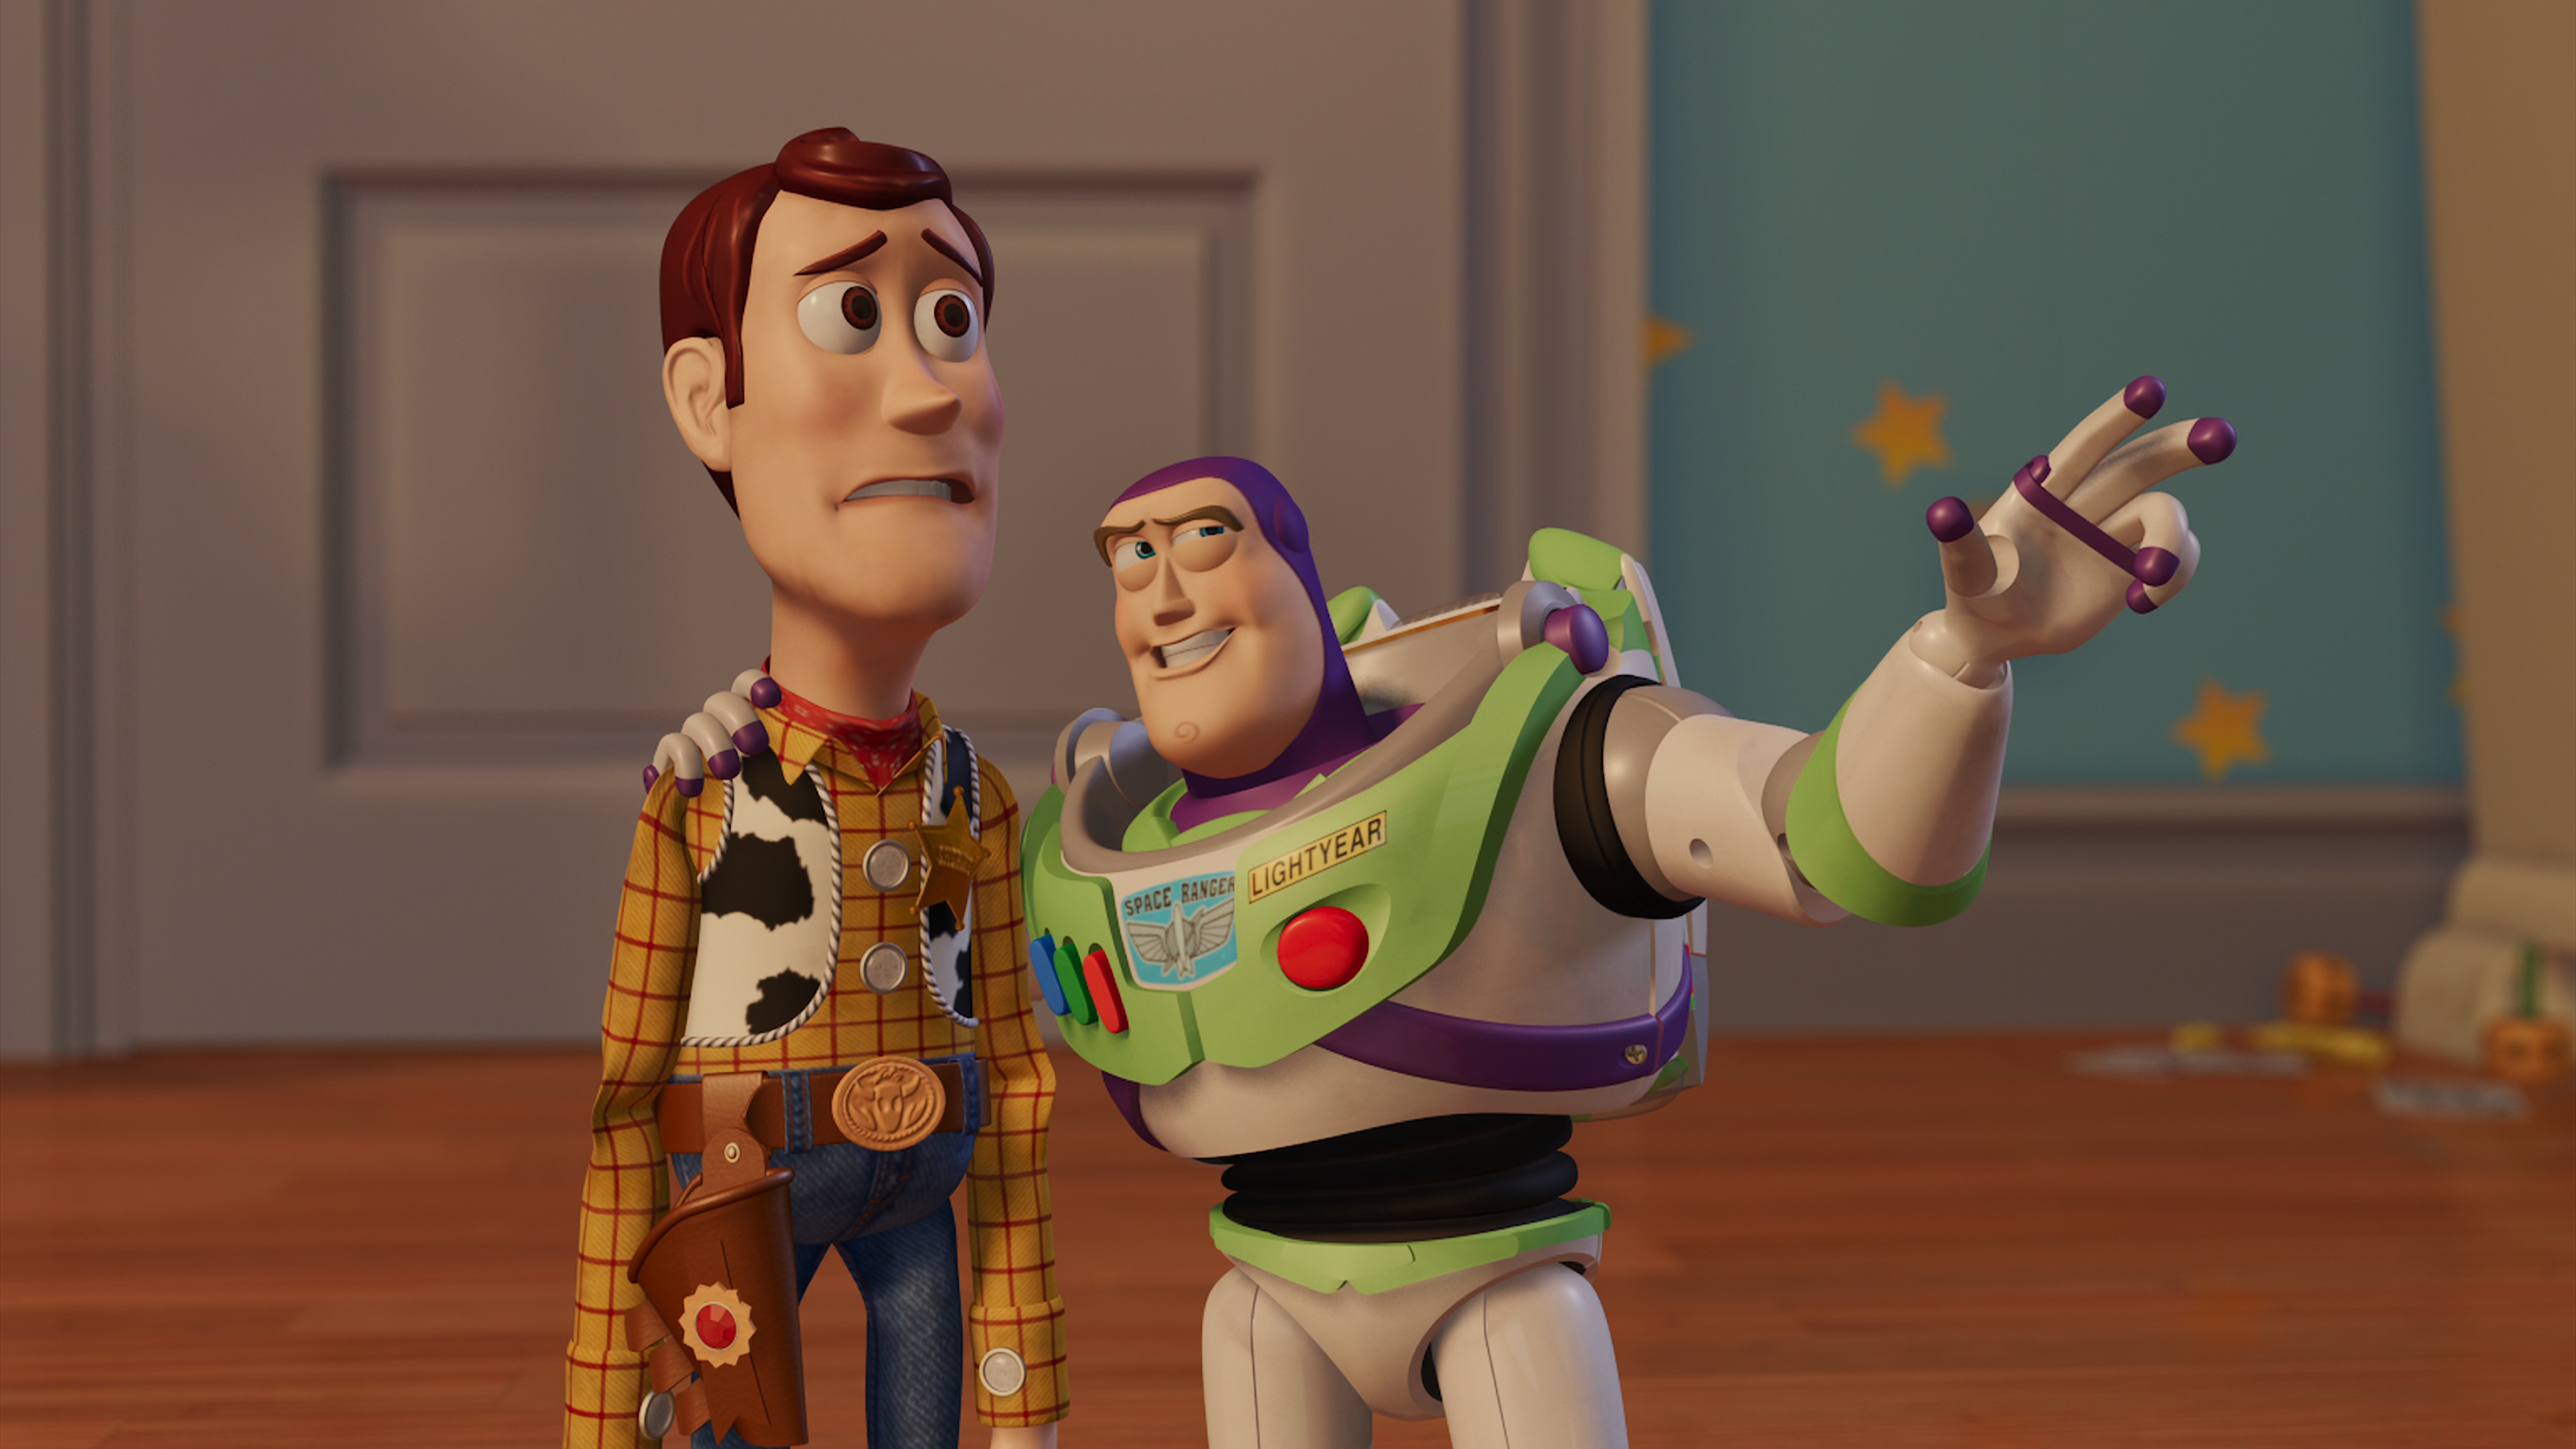 Toy Story 2 - 4K Ultra HD Blu-ray Ultra HD Review | High Def Digest